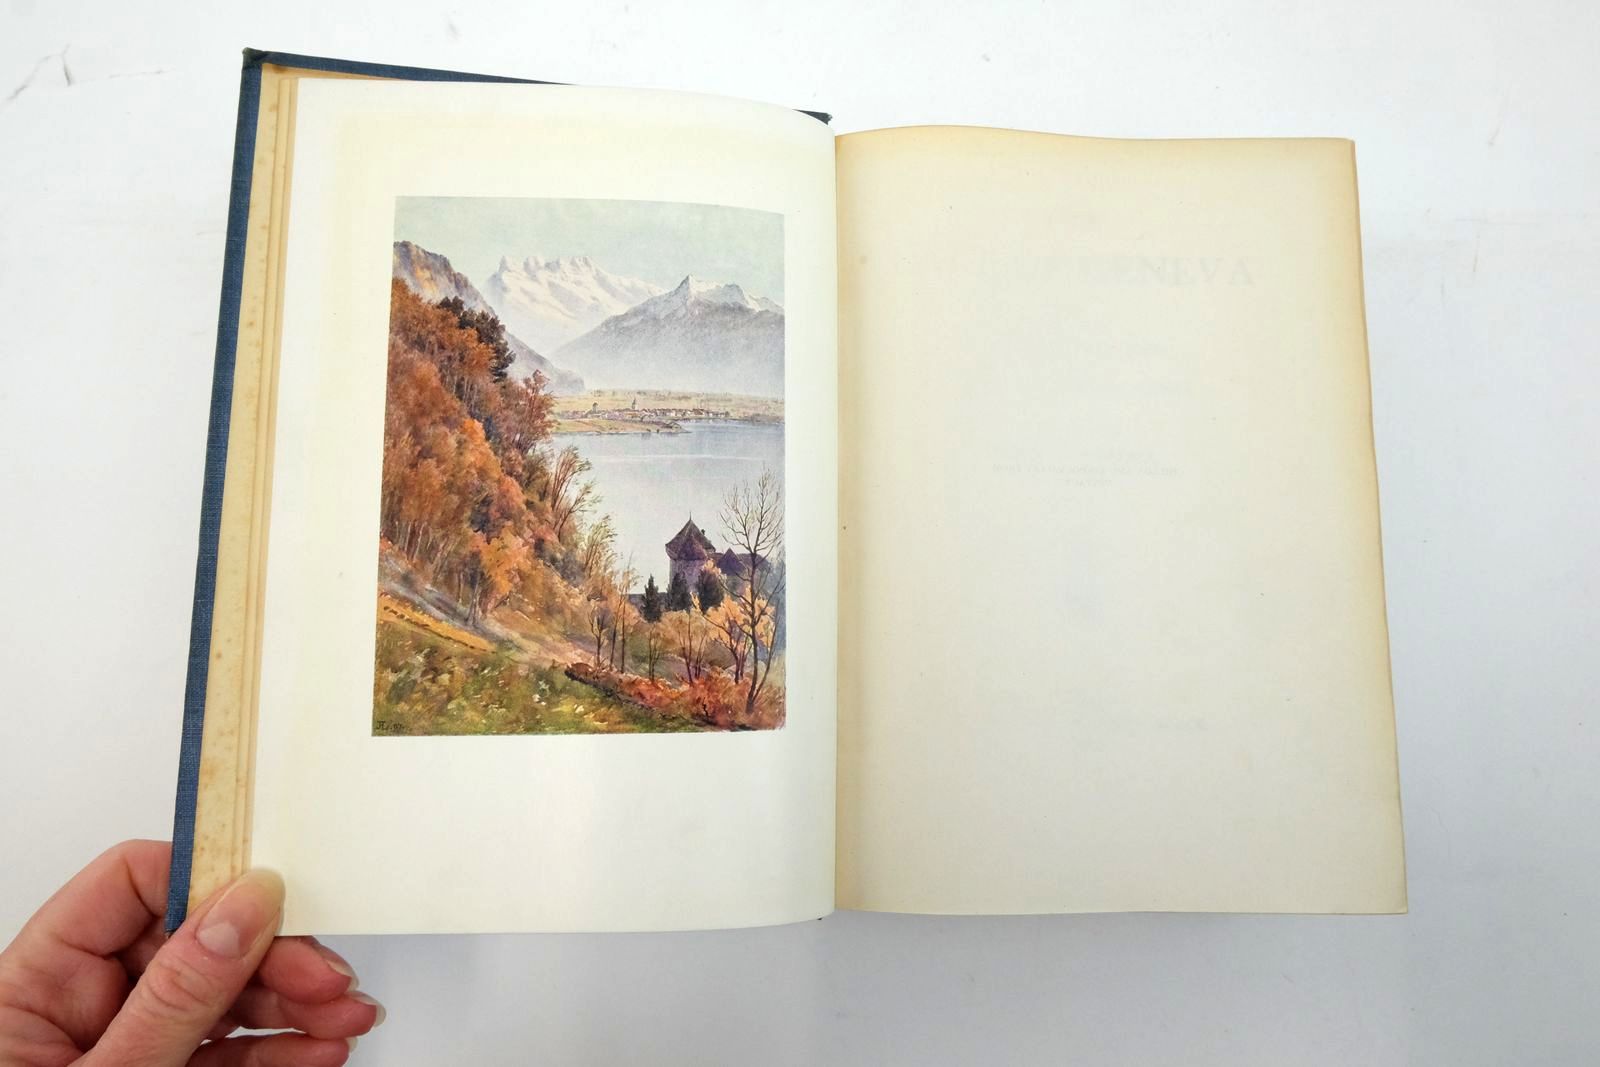 Photo of THE LAKE OF GENEVA written by Gribble, Francis illustrated by Lewis, J. Hardwicke
Lewis, May Hardwicke published by Adam & Charles Black (STOCK CODE: 2137434)  for sale by Stella & Rose's Books